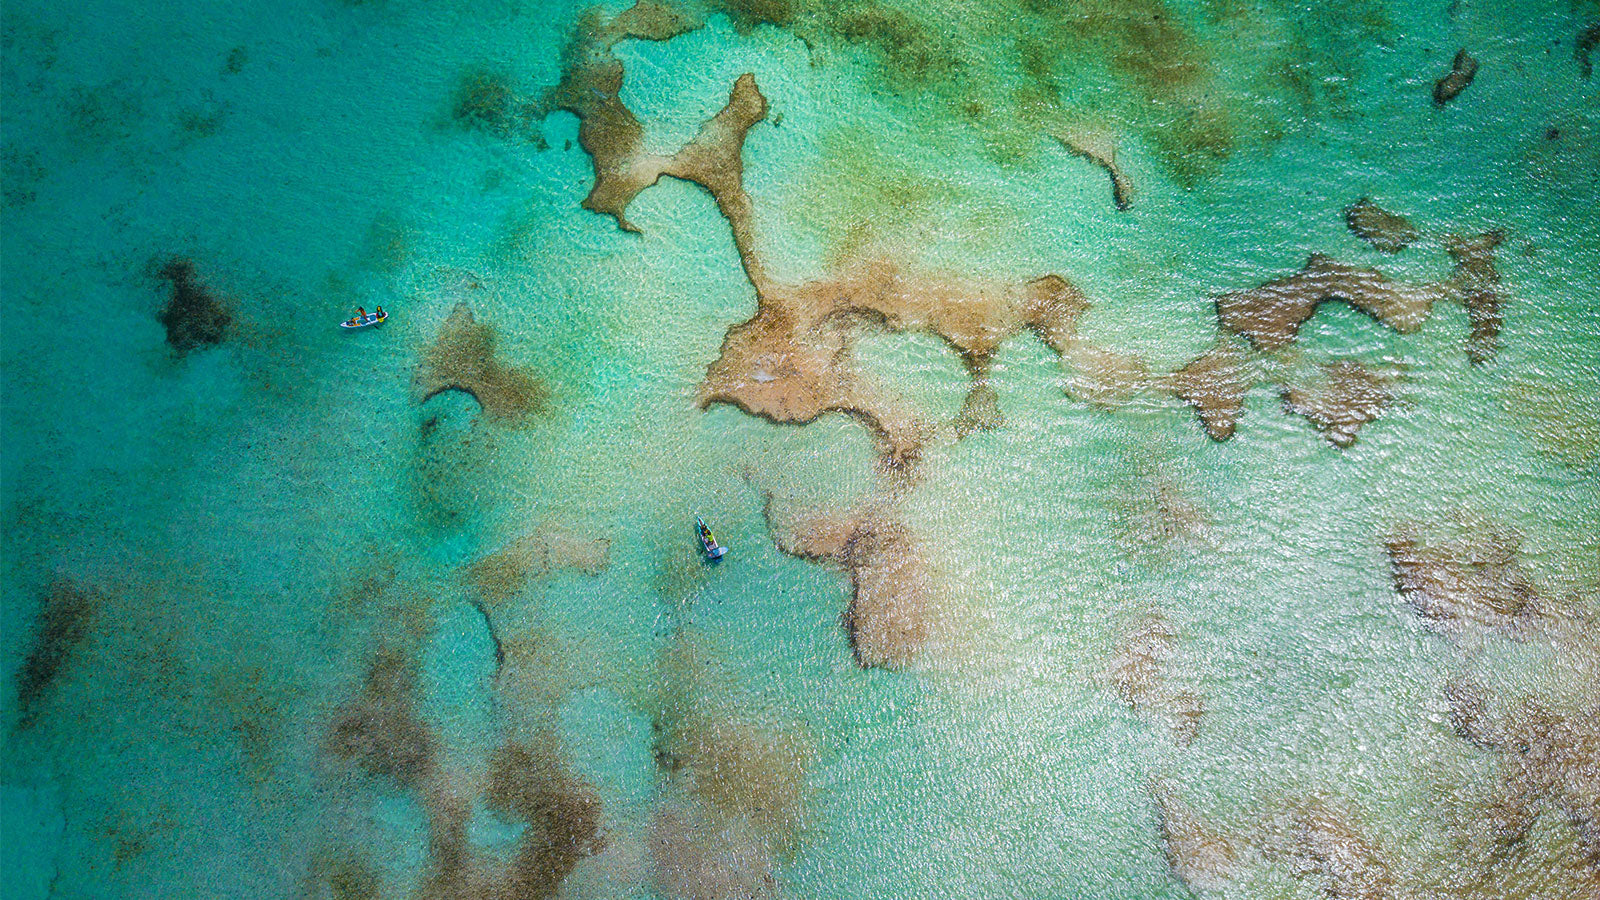 Paddleboarders paddling over a coral reef image shot from above